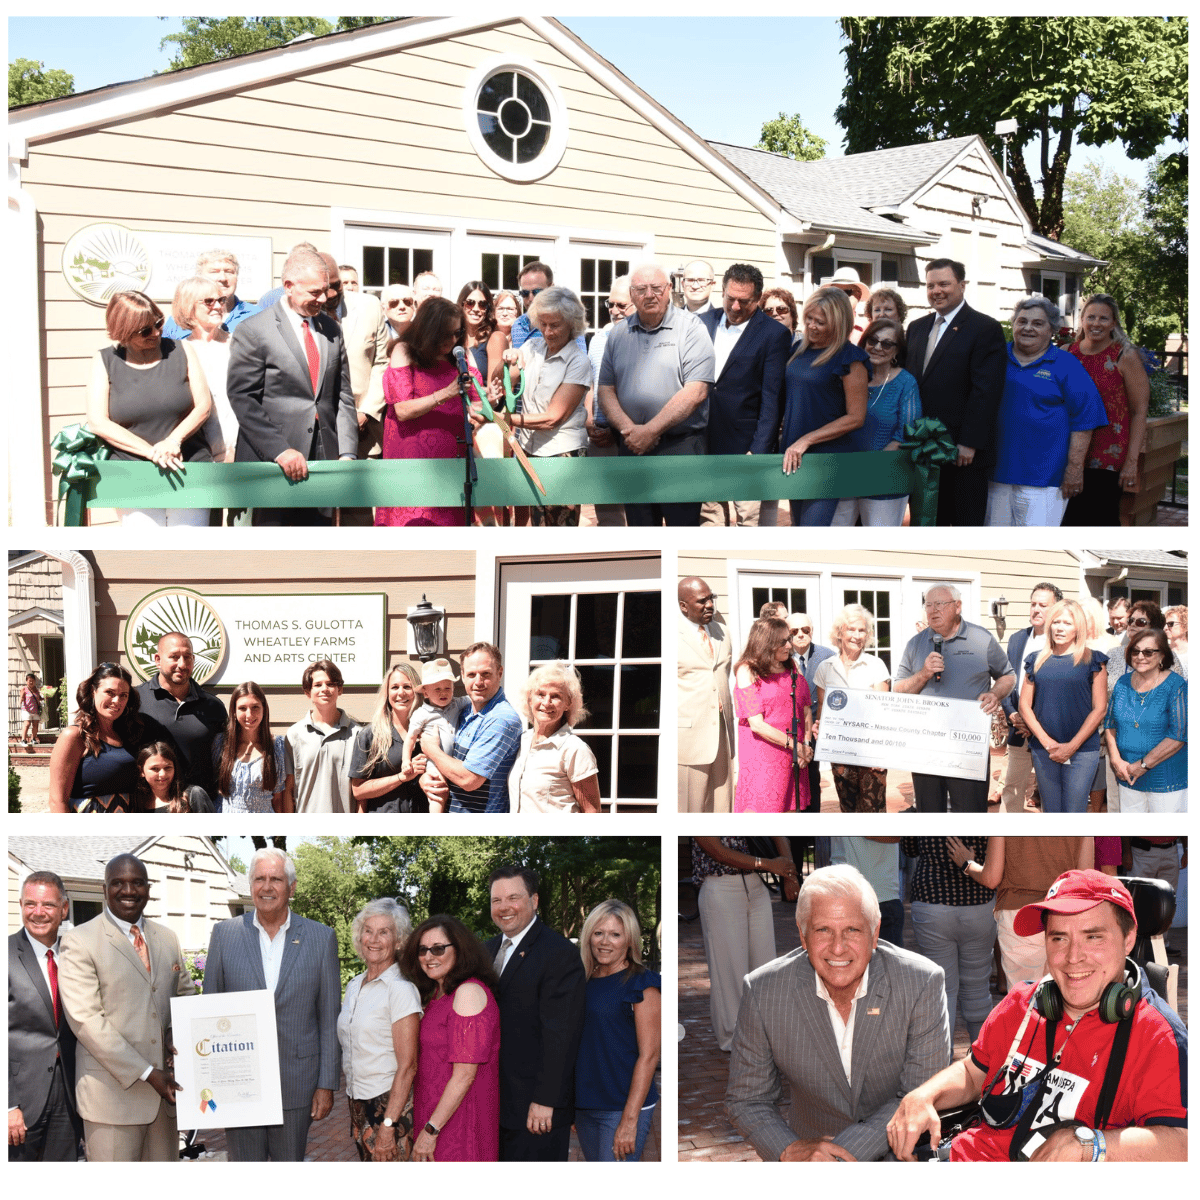 The ribbon-cutting, dedication, donation, and citations for the Thomas S. Gulotta Wheatley Farms & Arts Center took place on a sunny Thursday afternoon with self-advocates, agency leaders, friends in government, and the wider AHRC Nassau community coming together to celebrate.